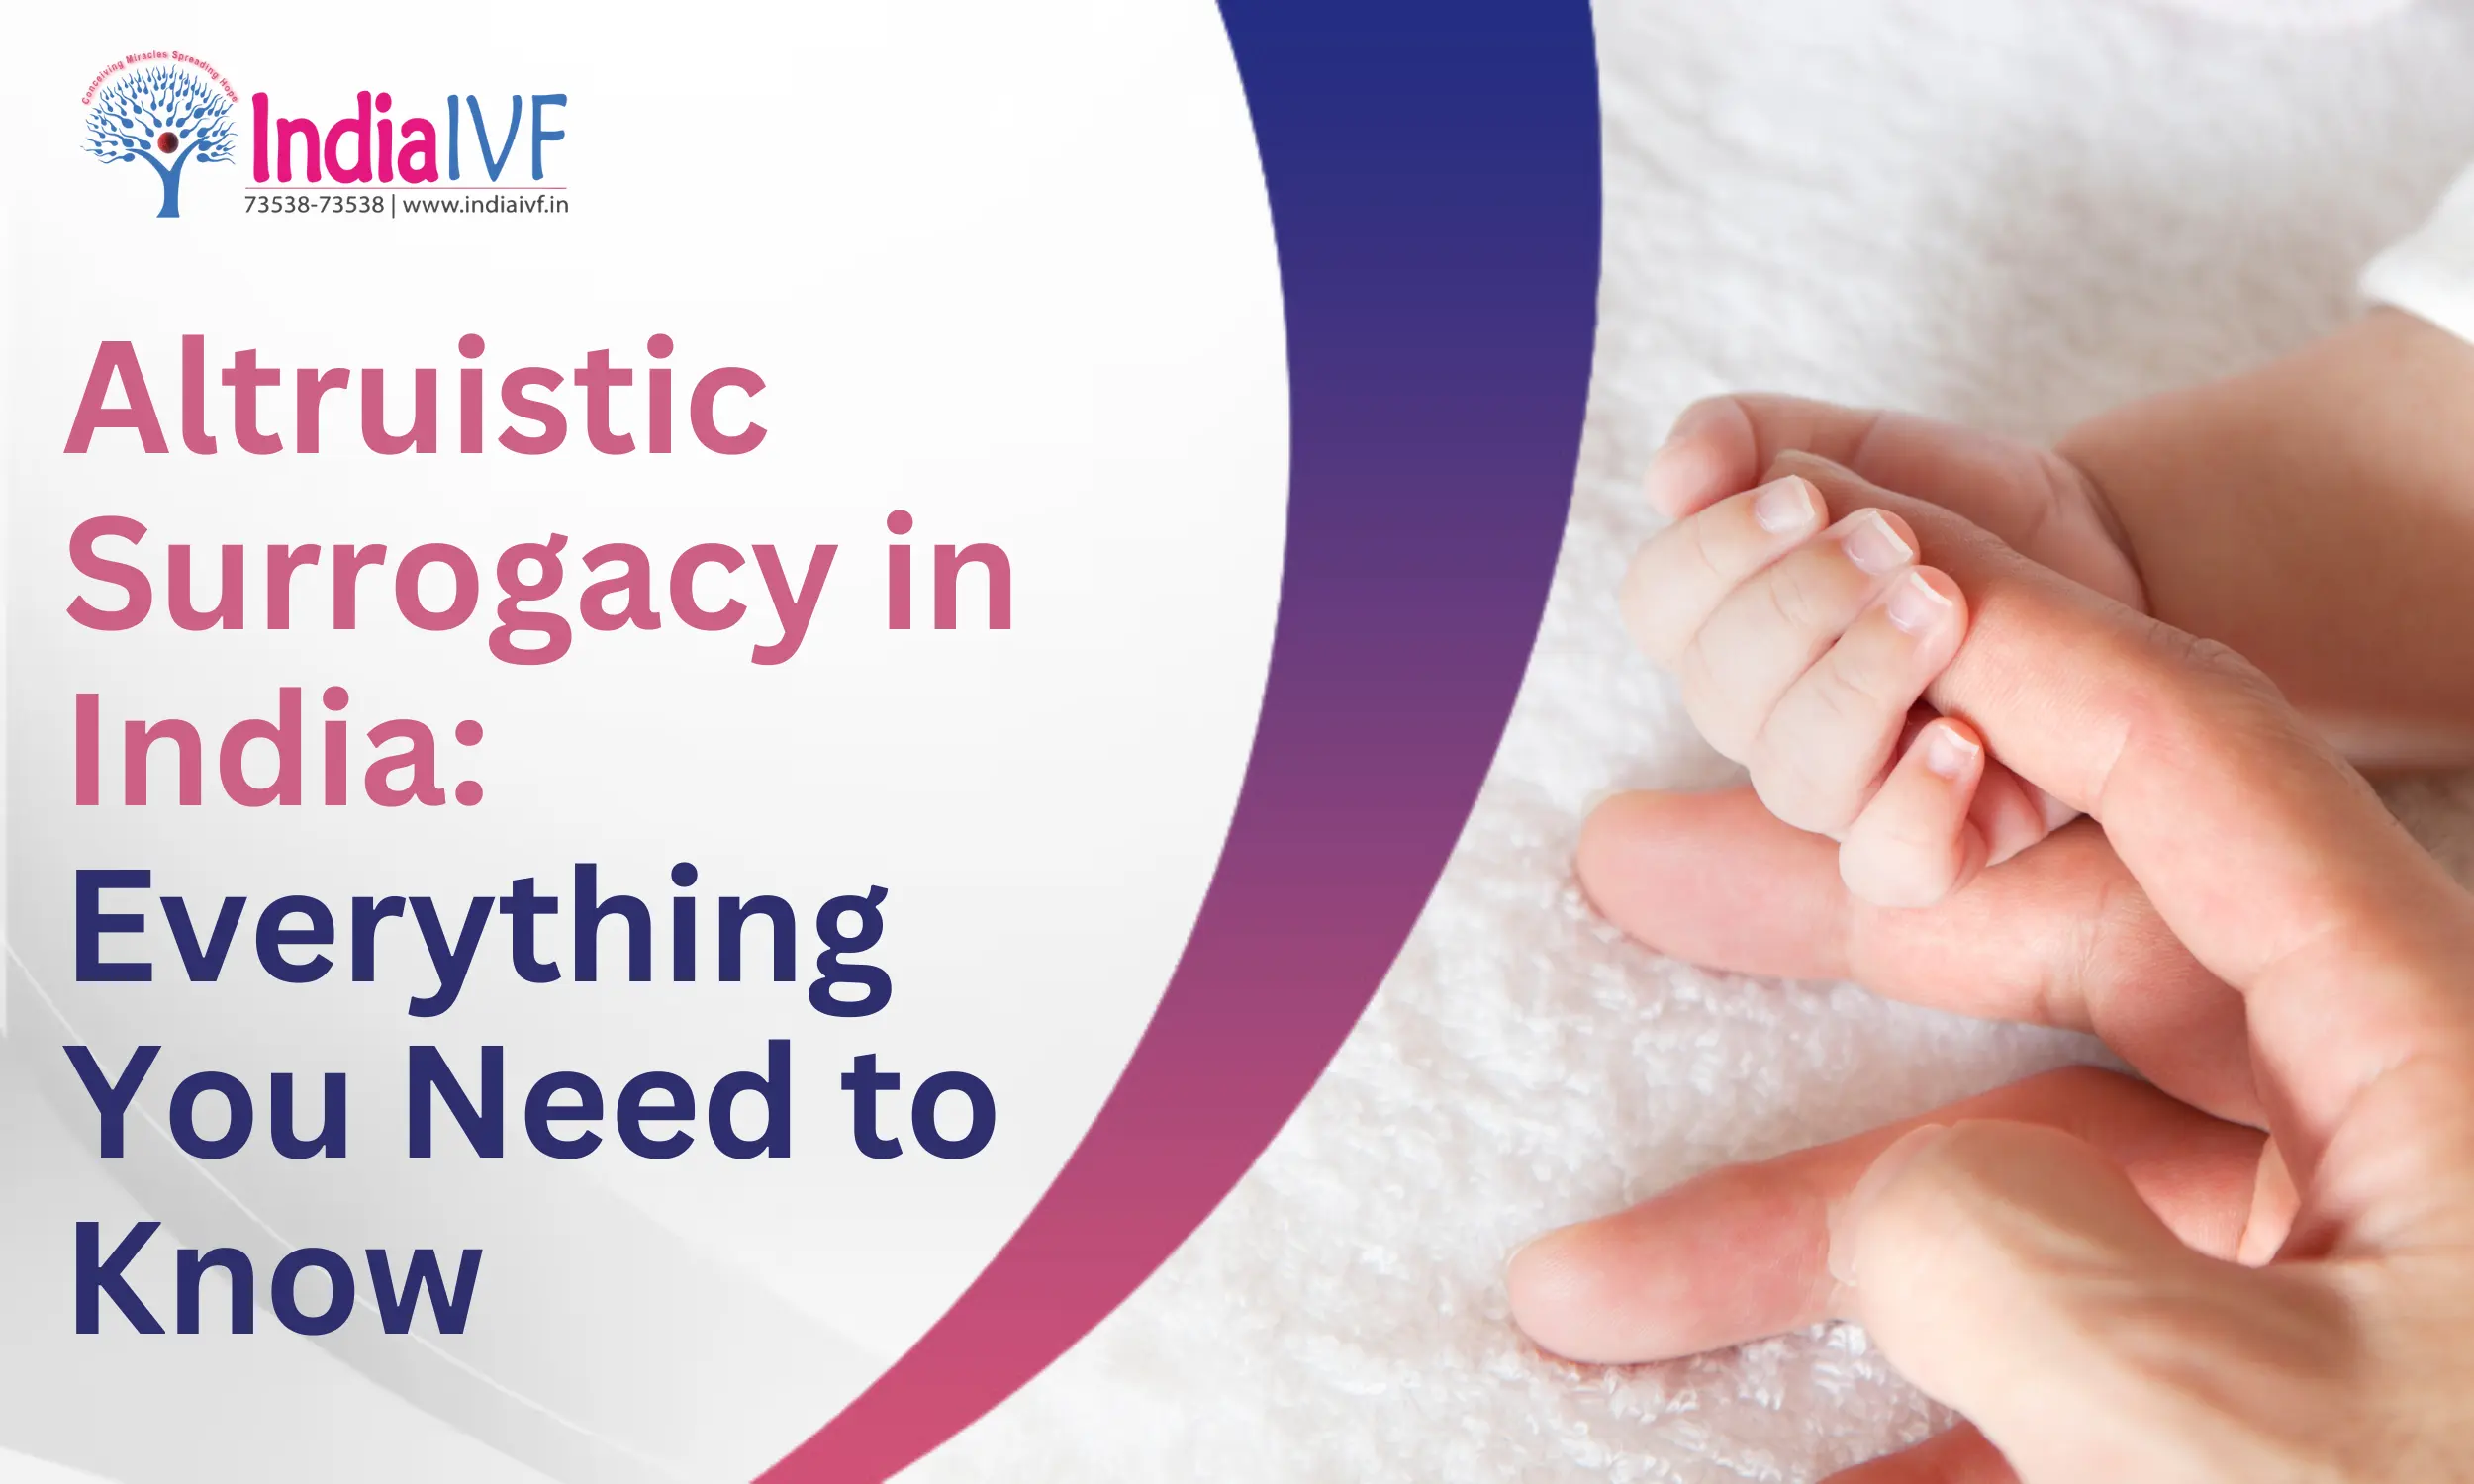 Altruistic Surrogacy in India: Everything You Need to Know